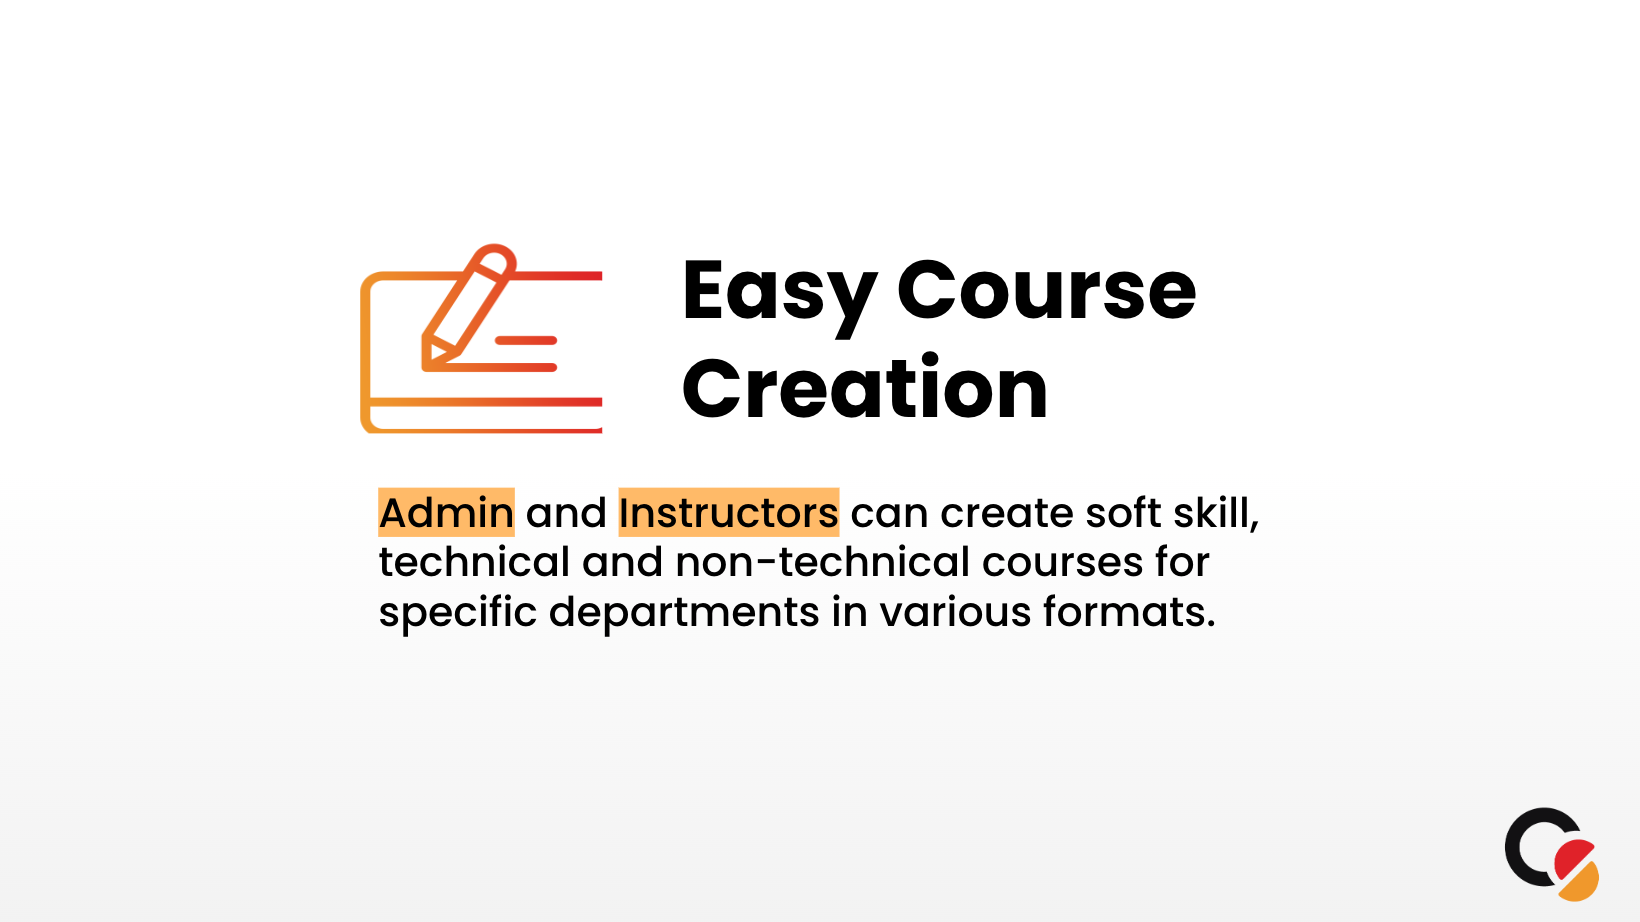 Course creation is now made easy and engaging by using various formats.